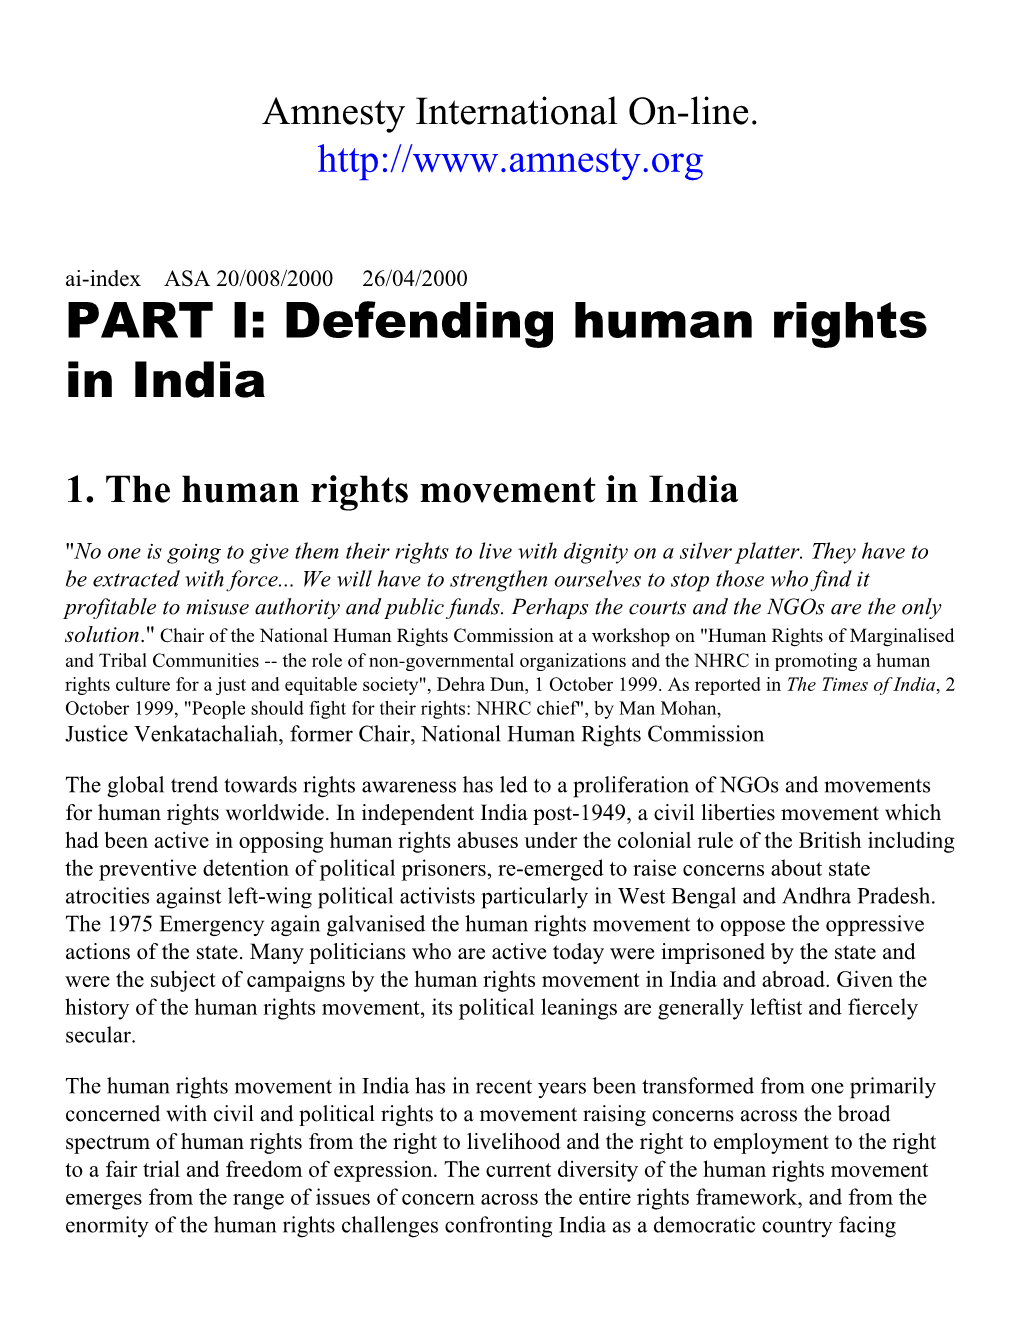 Defending Human Rights in India